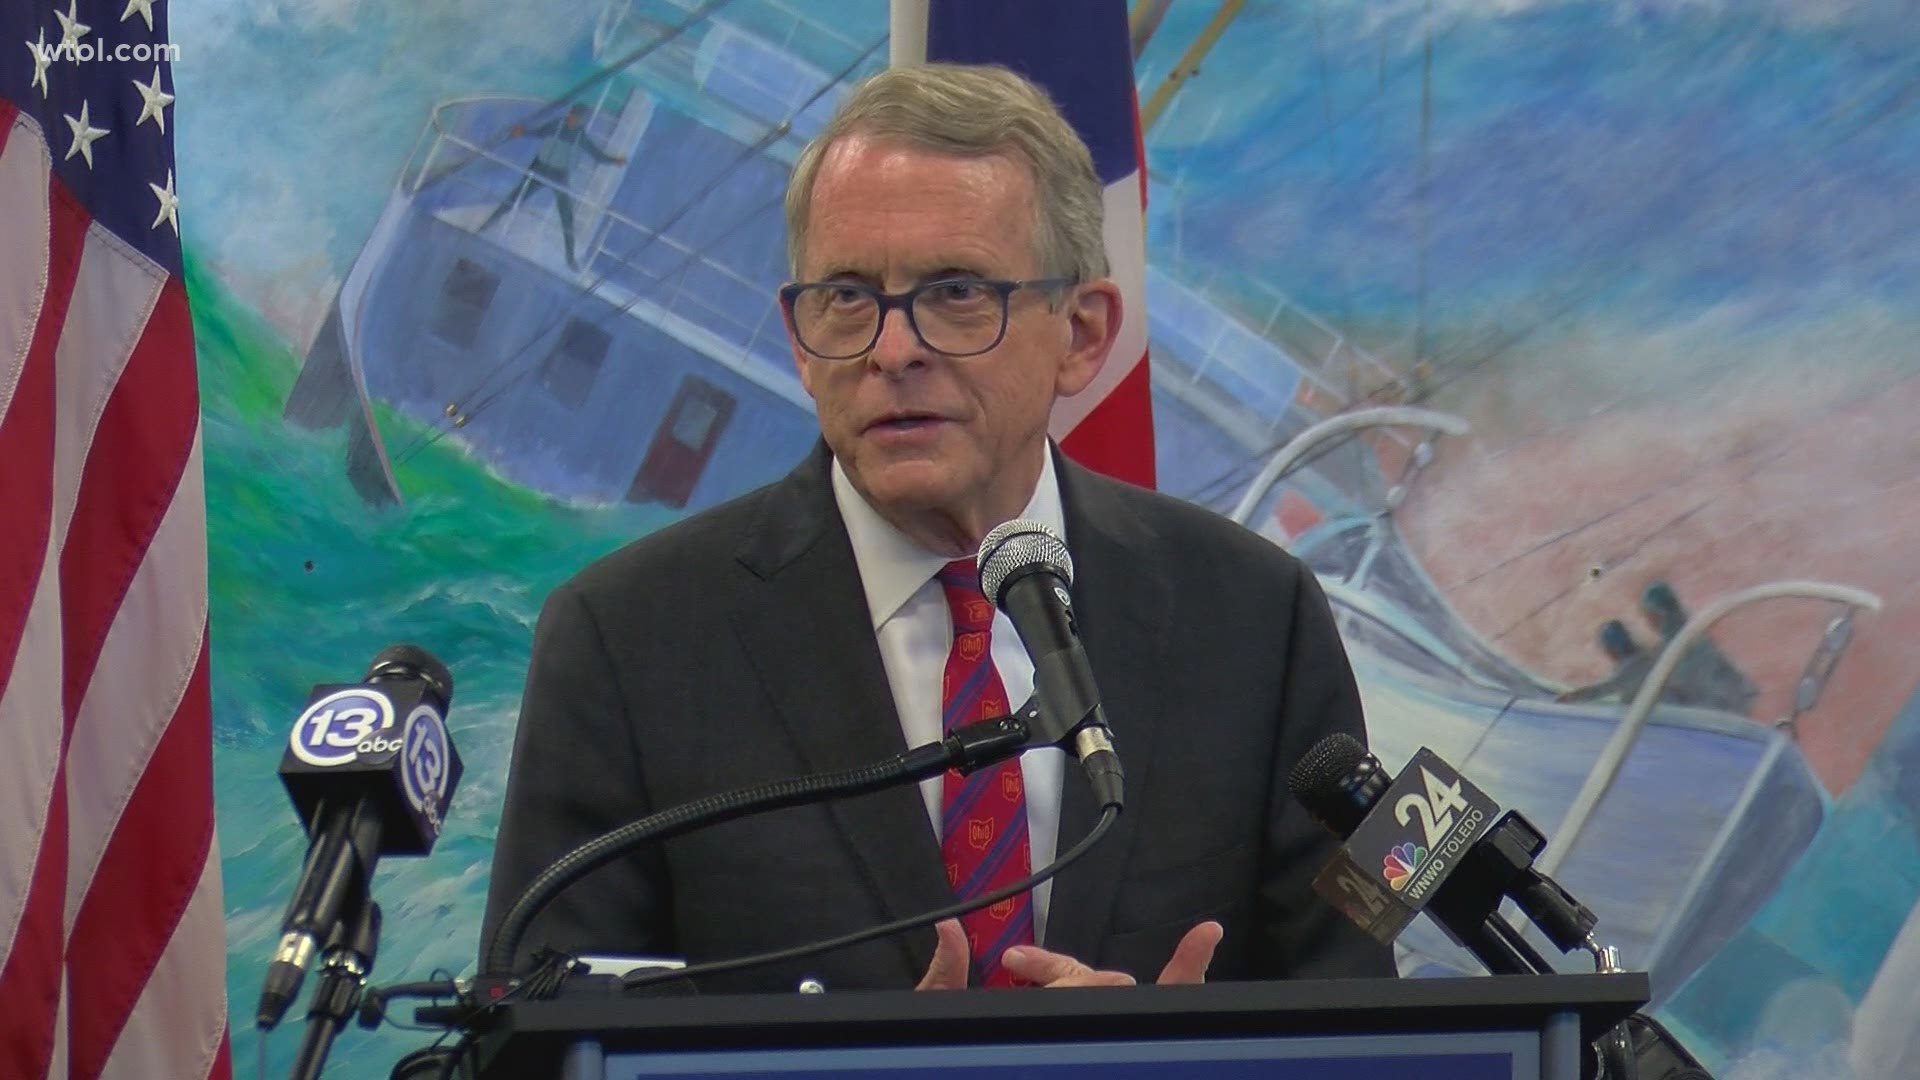 DeWine said there's no part of the state where tourism has more of an economic impact than the north coast.